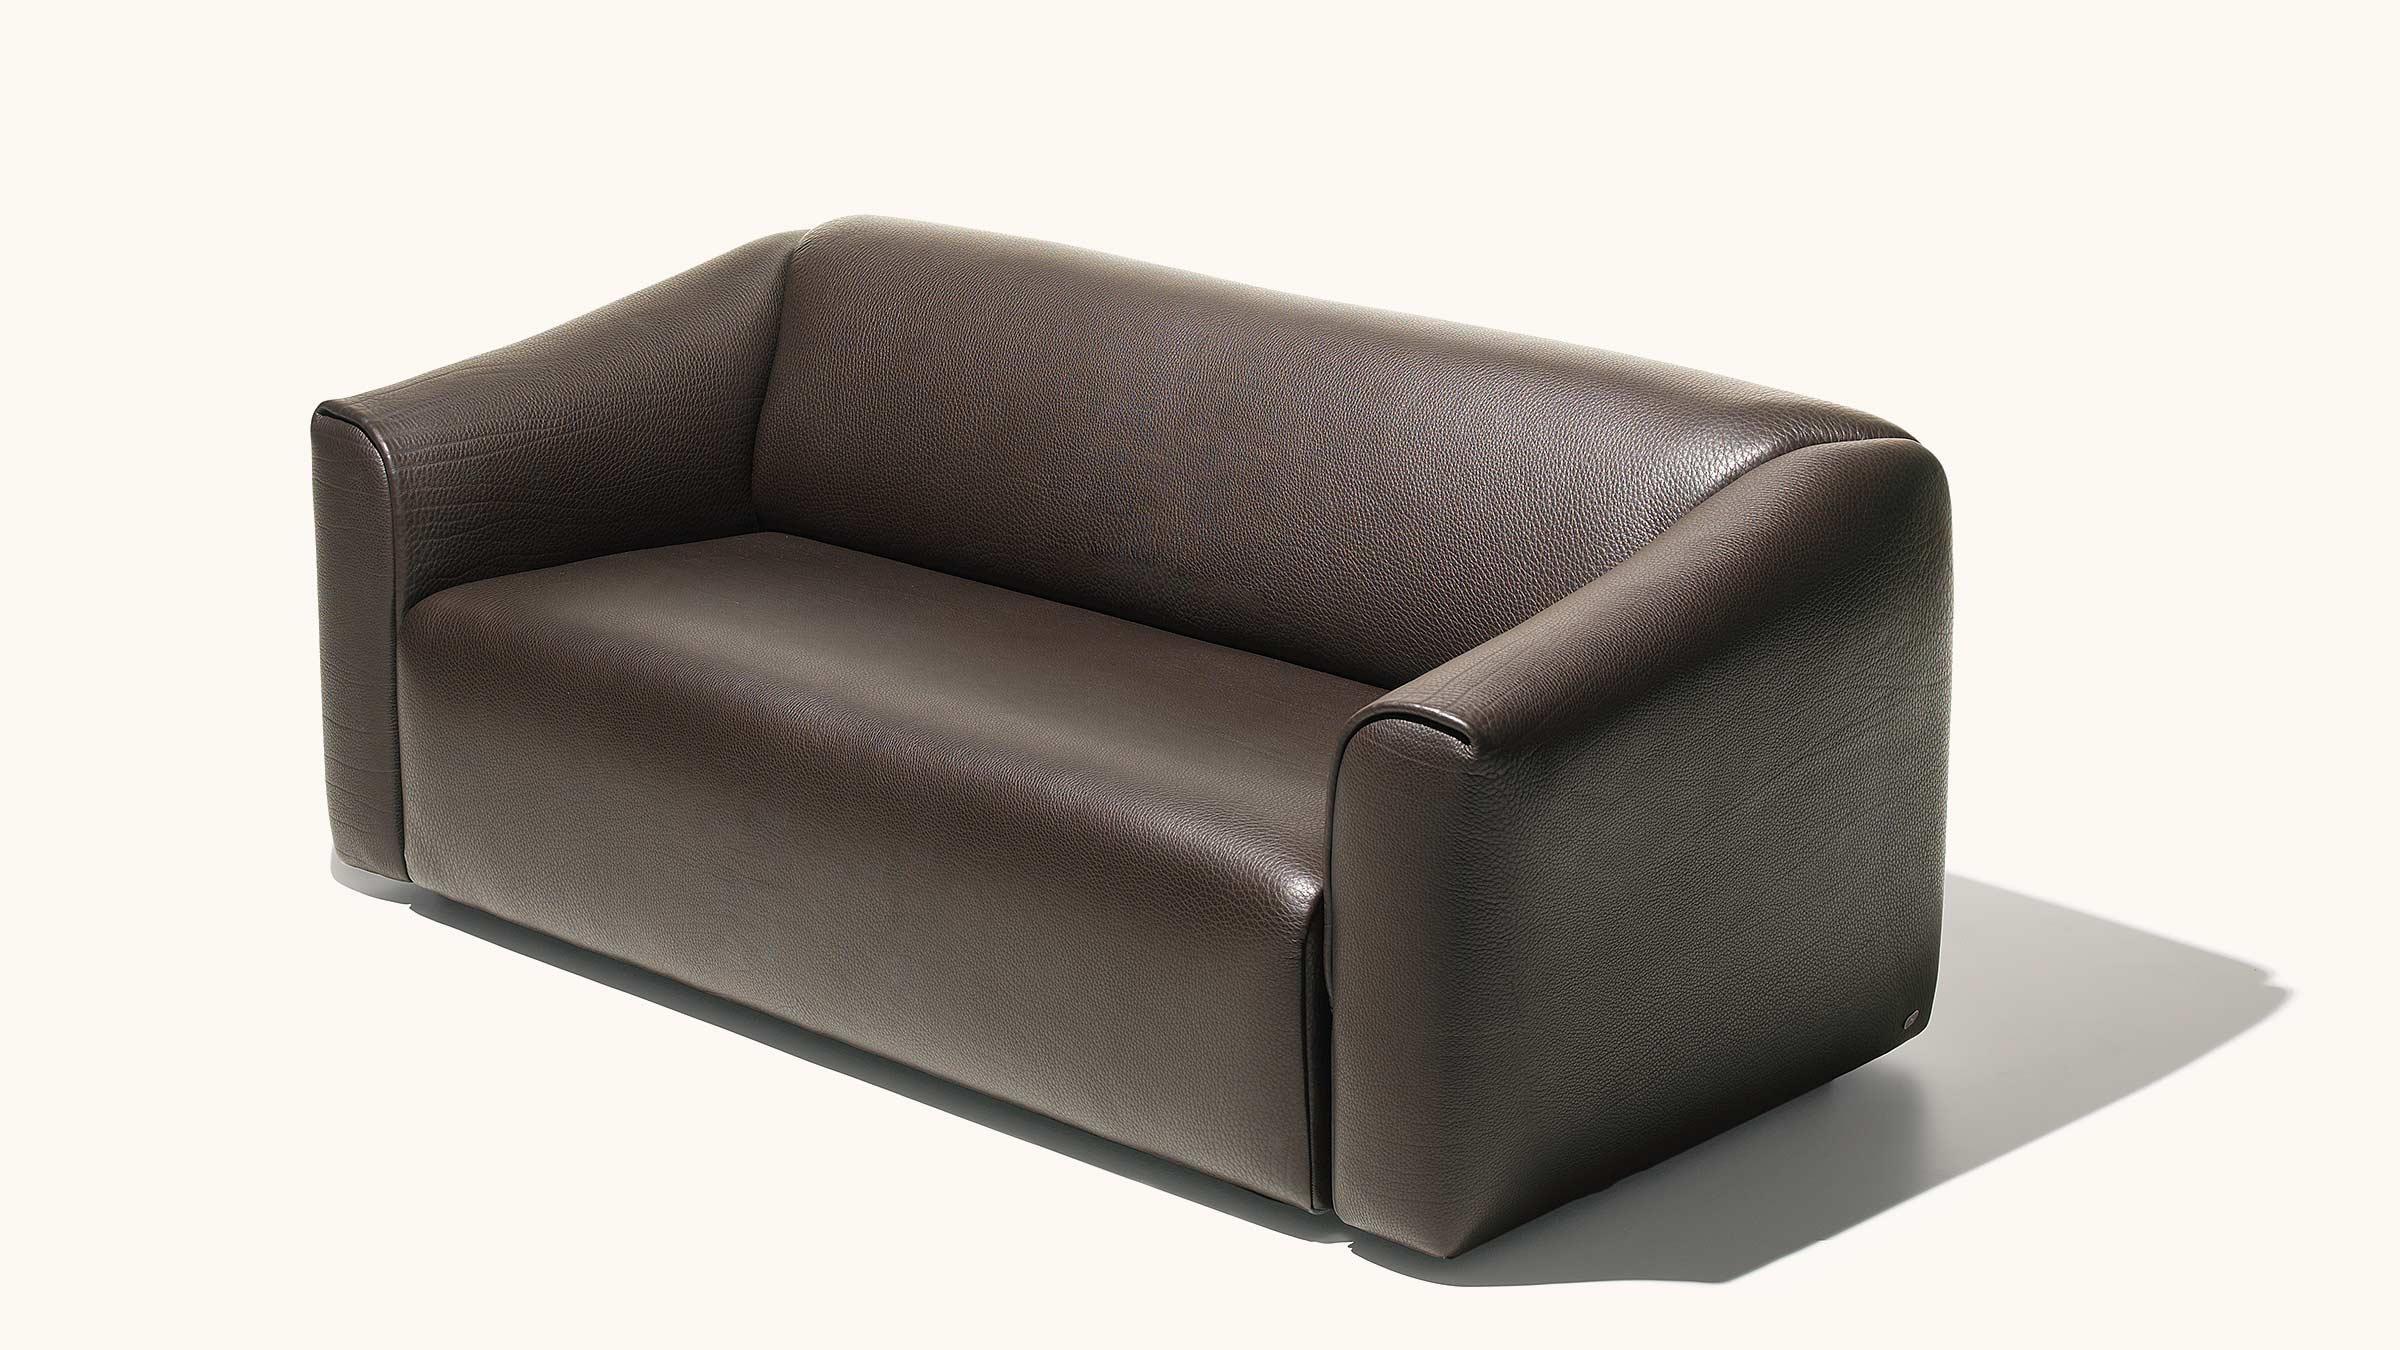 DS-47 is available as a two- and three-seater sofa, and as an armchair and stool; 5-mm-thick NECK leather recognizable in characteristic fat wrinkles lend it an unmistakable expression that makes it easy to spot. For all the parts required for